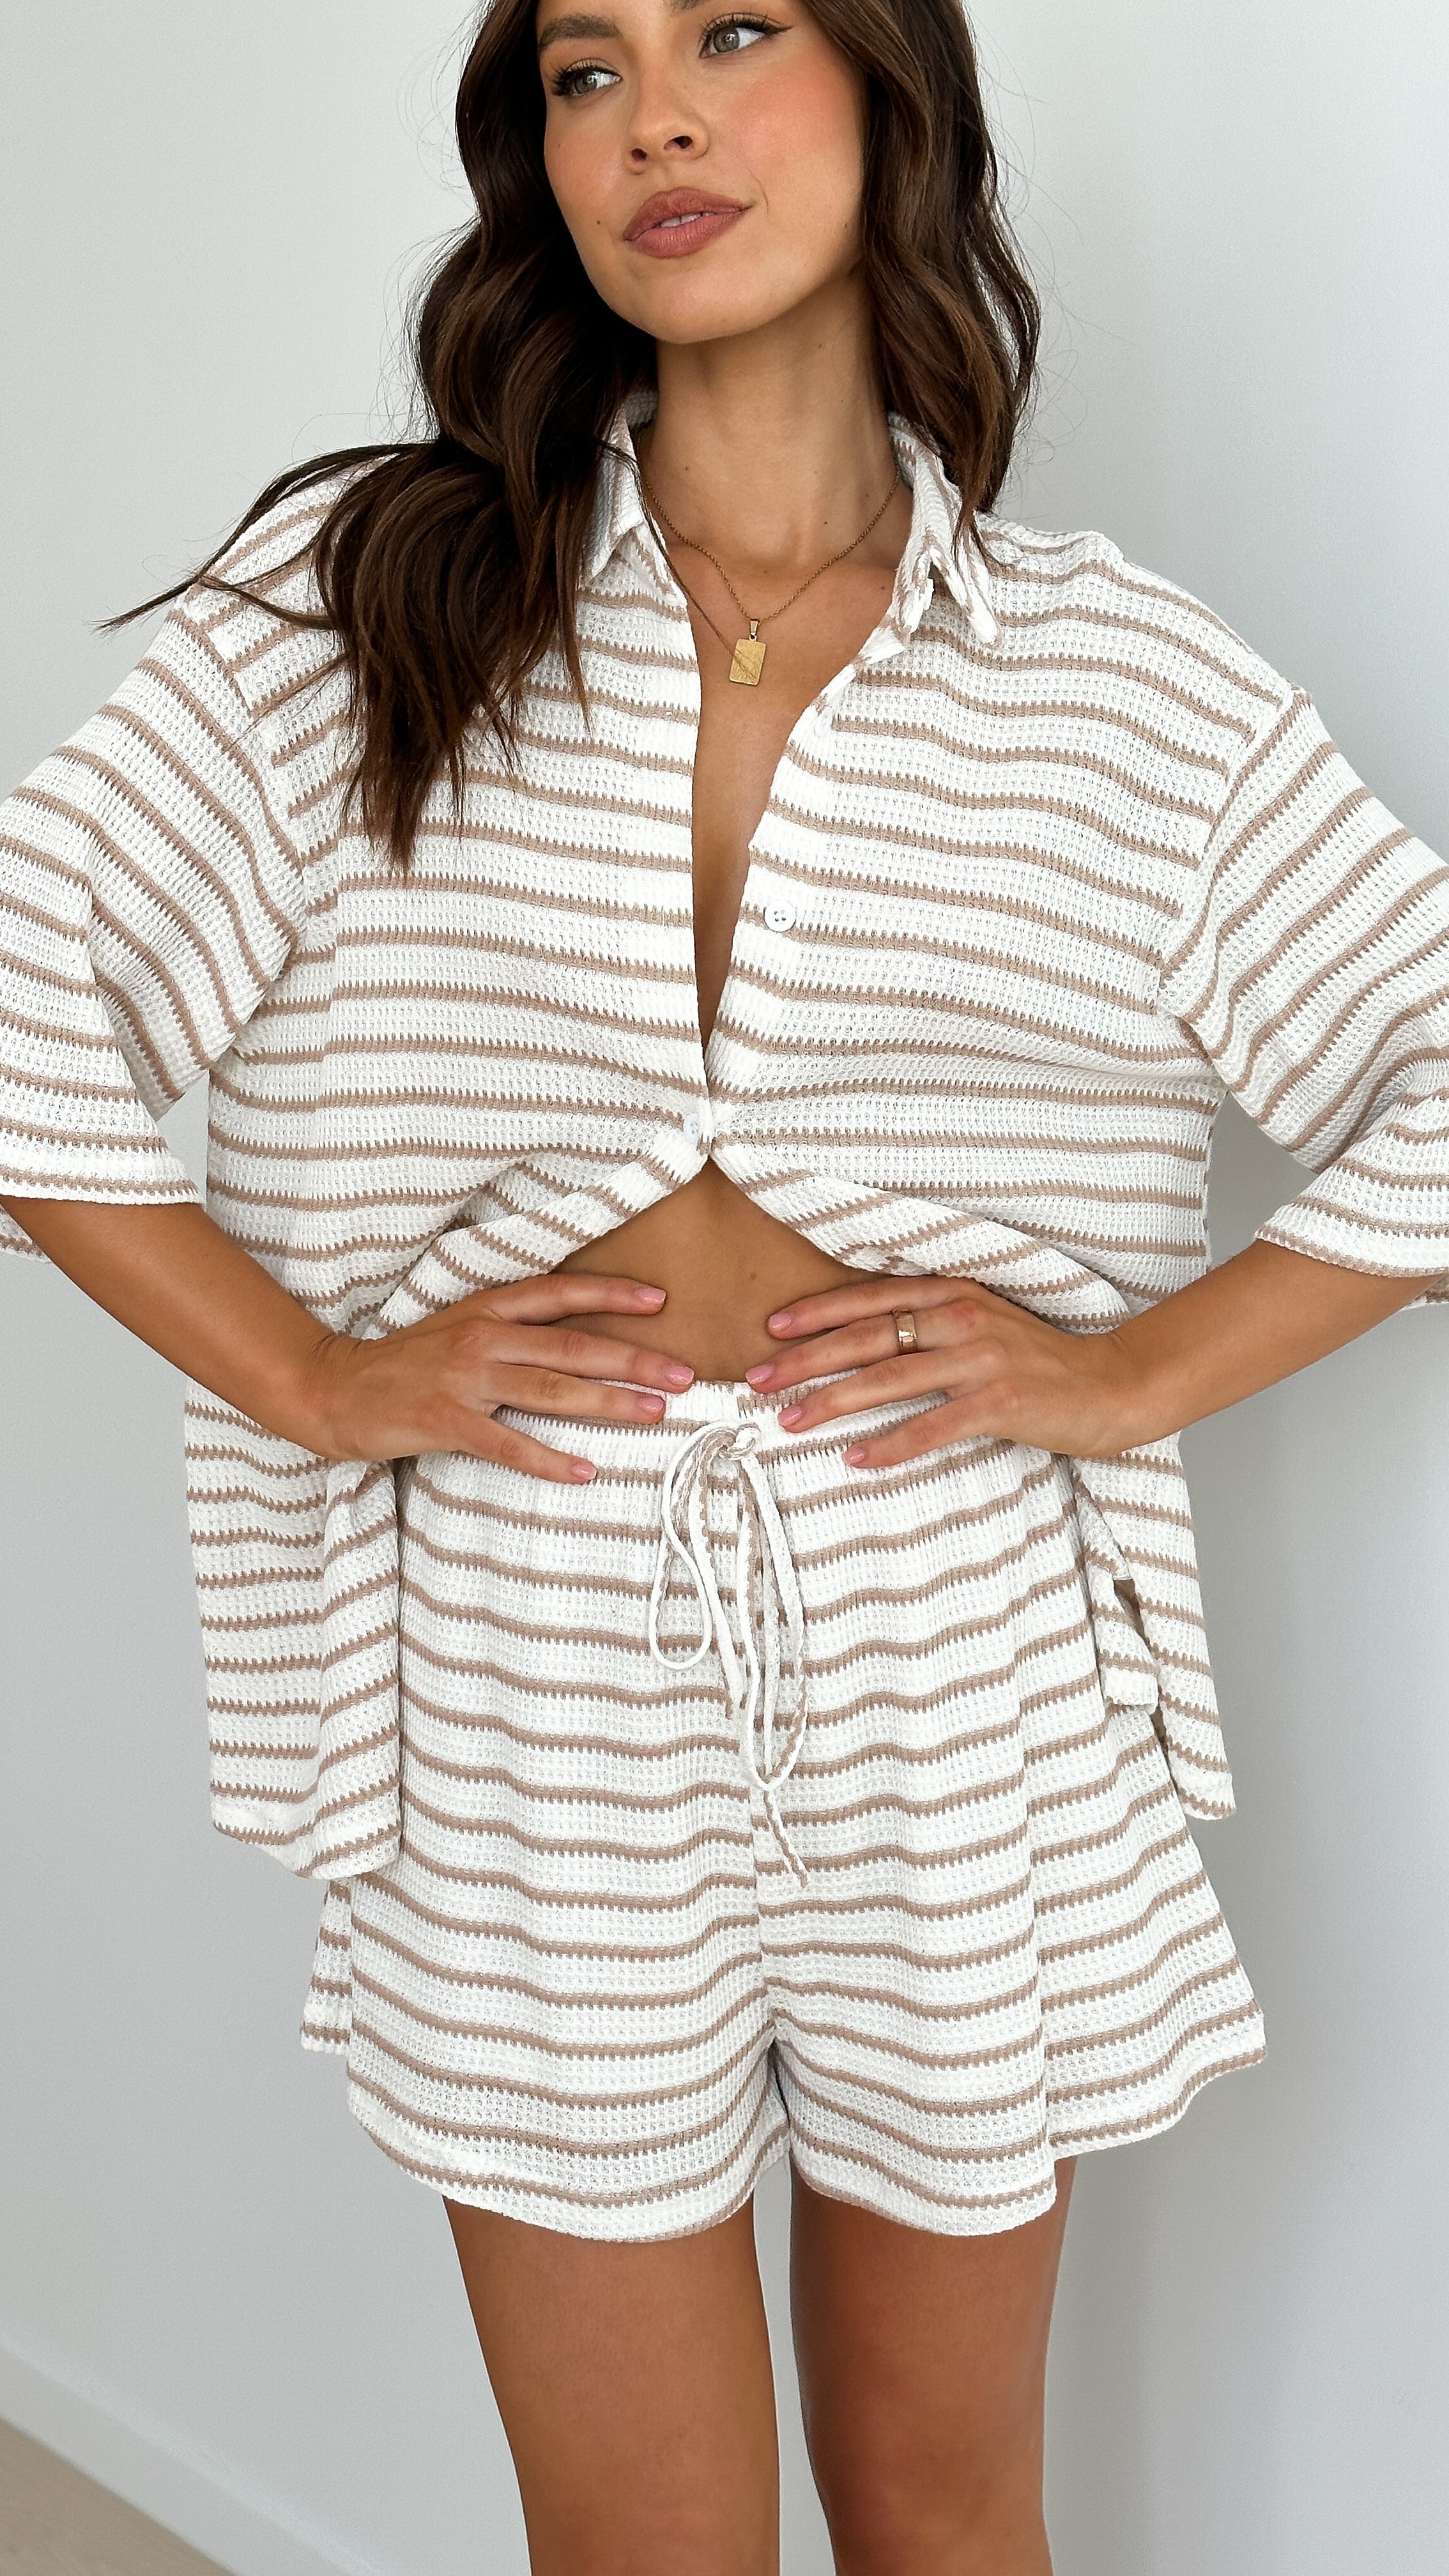 Lacole Button Up Shirt and Shorts Set - White / Beige Stripe - Billy J